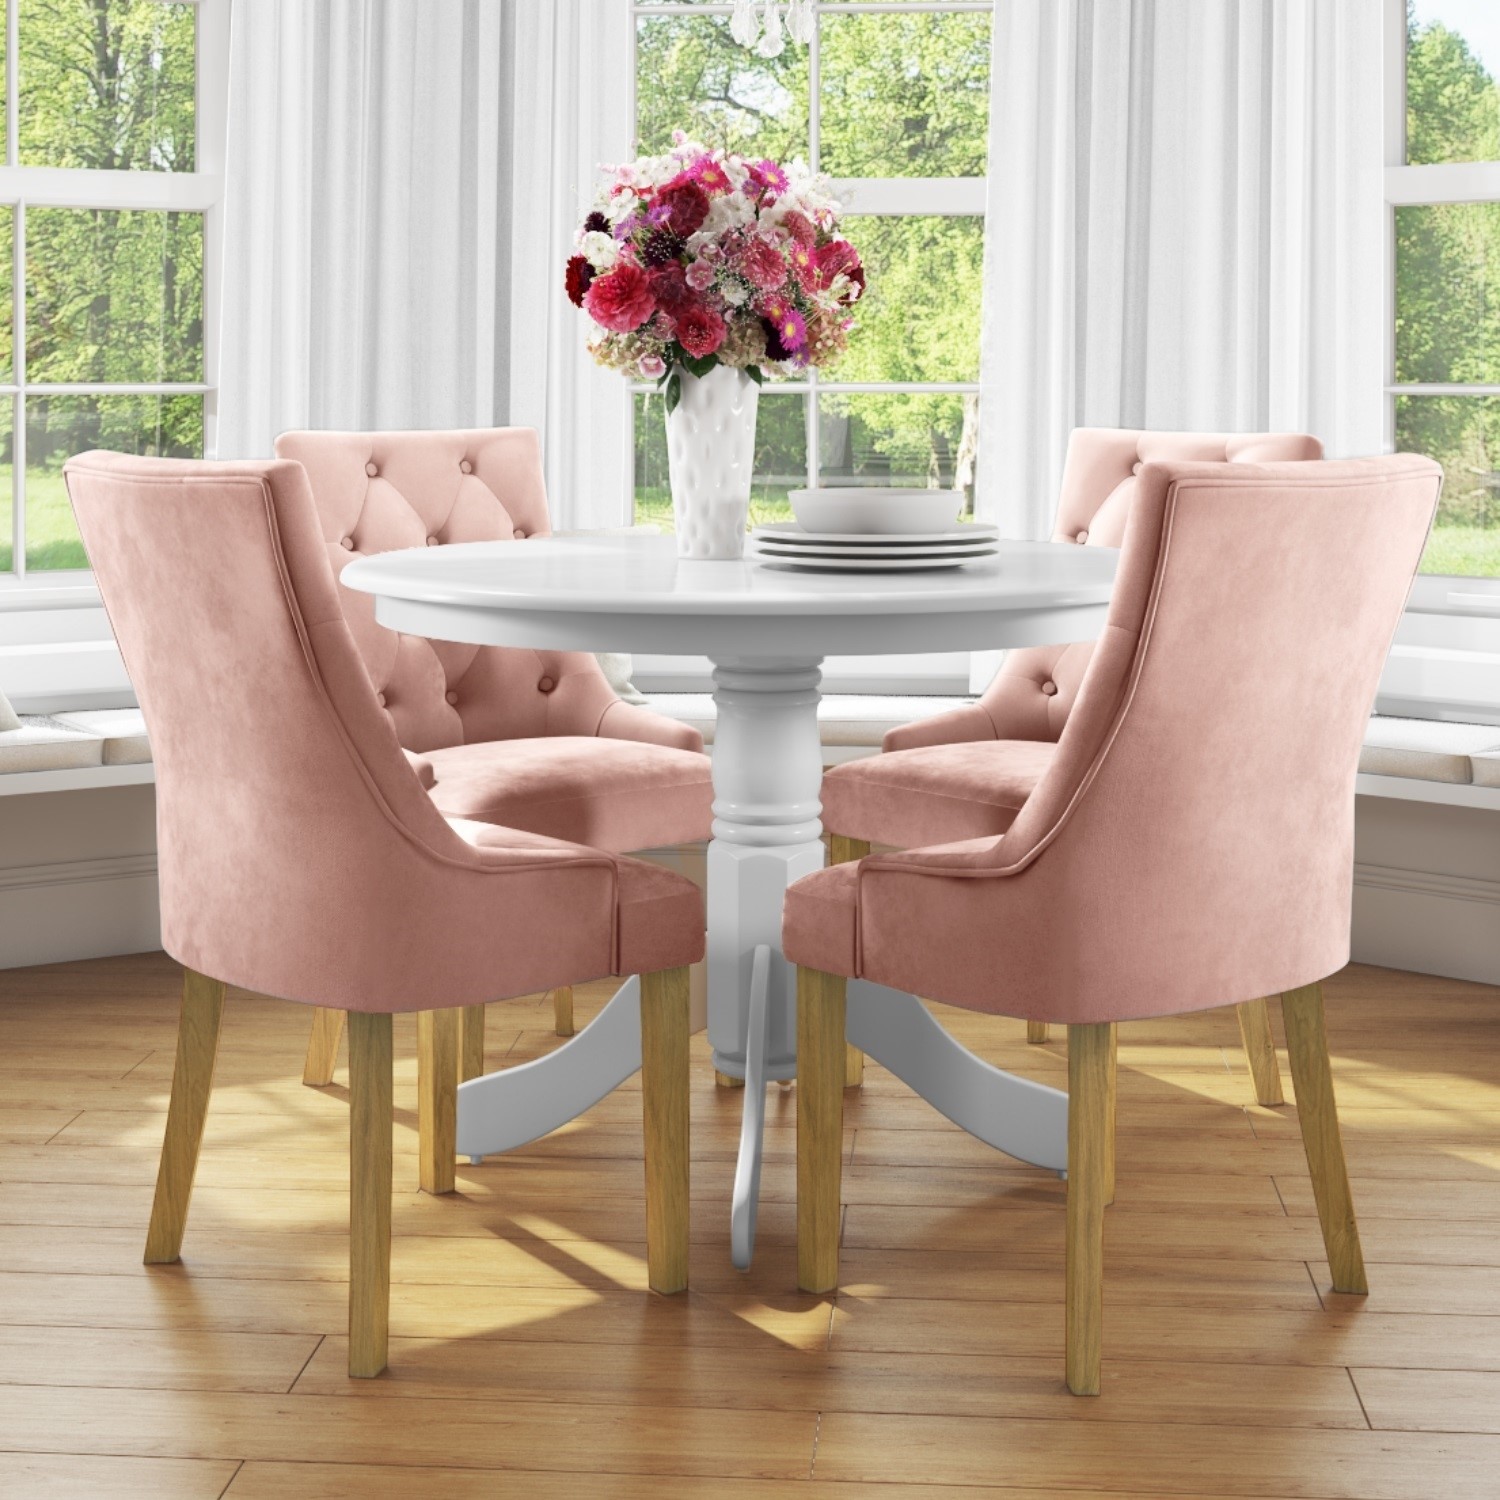 Small Round Dining Table in White with 4 Velvet Chairs in Pink BUN